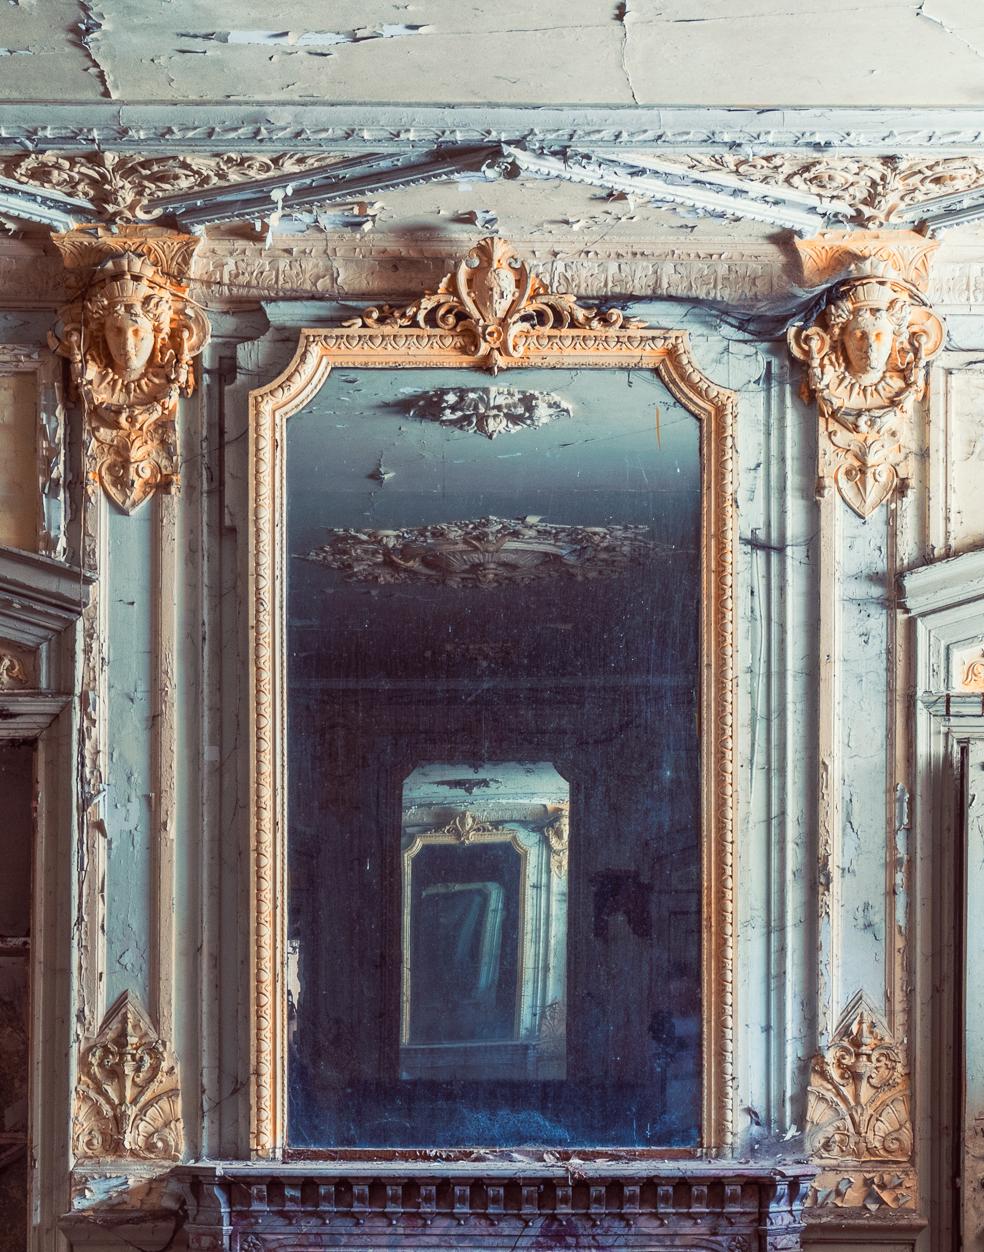 Grand Salon by Gina Soden [2020]
limited_edition and hand signed by the artist 

Digital photograph on Baryta paper

Edition number 2

Image size: H:87.5 cm x W:70 cm

Complete Size of Unframed Work: H:91 cm x W:74 cm x D:0.1cm

Sold